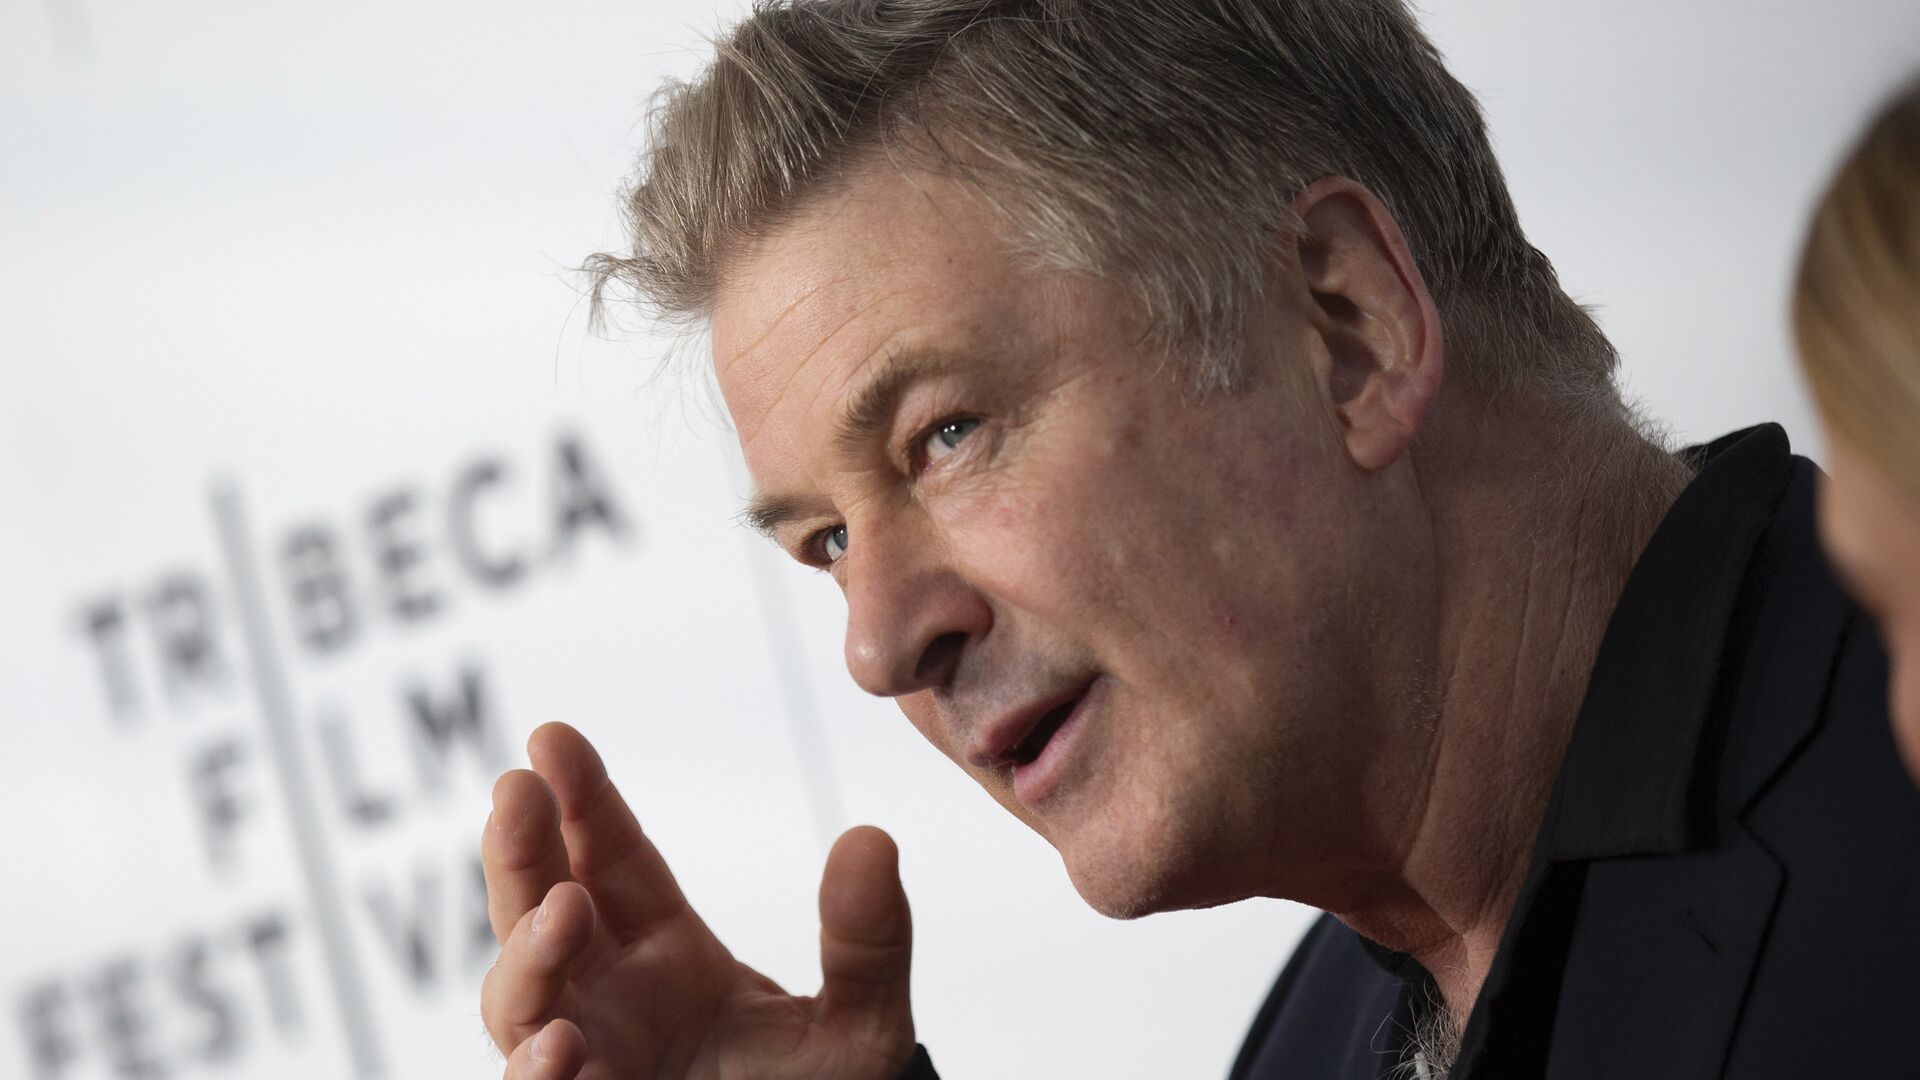 Actor Alec Baldwin attends the screening for Framing John DeLorean during the 2019 Tribeca Film Festival at the SVA Theatre on Tuesday, April 30, 2019, in New York.  - Sputnik International, 1920, 24.10.2021